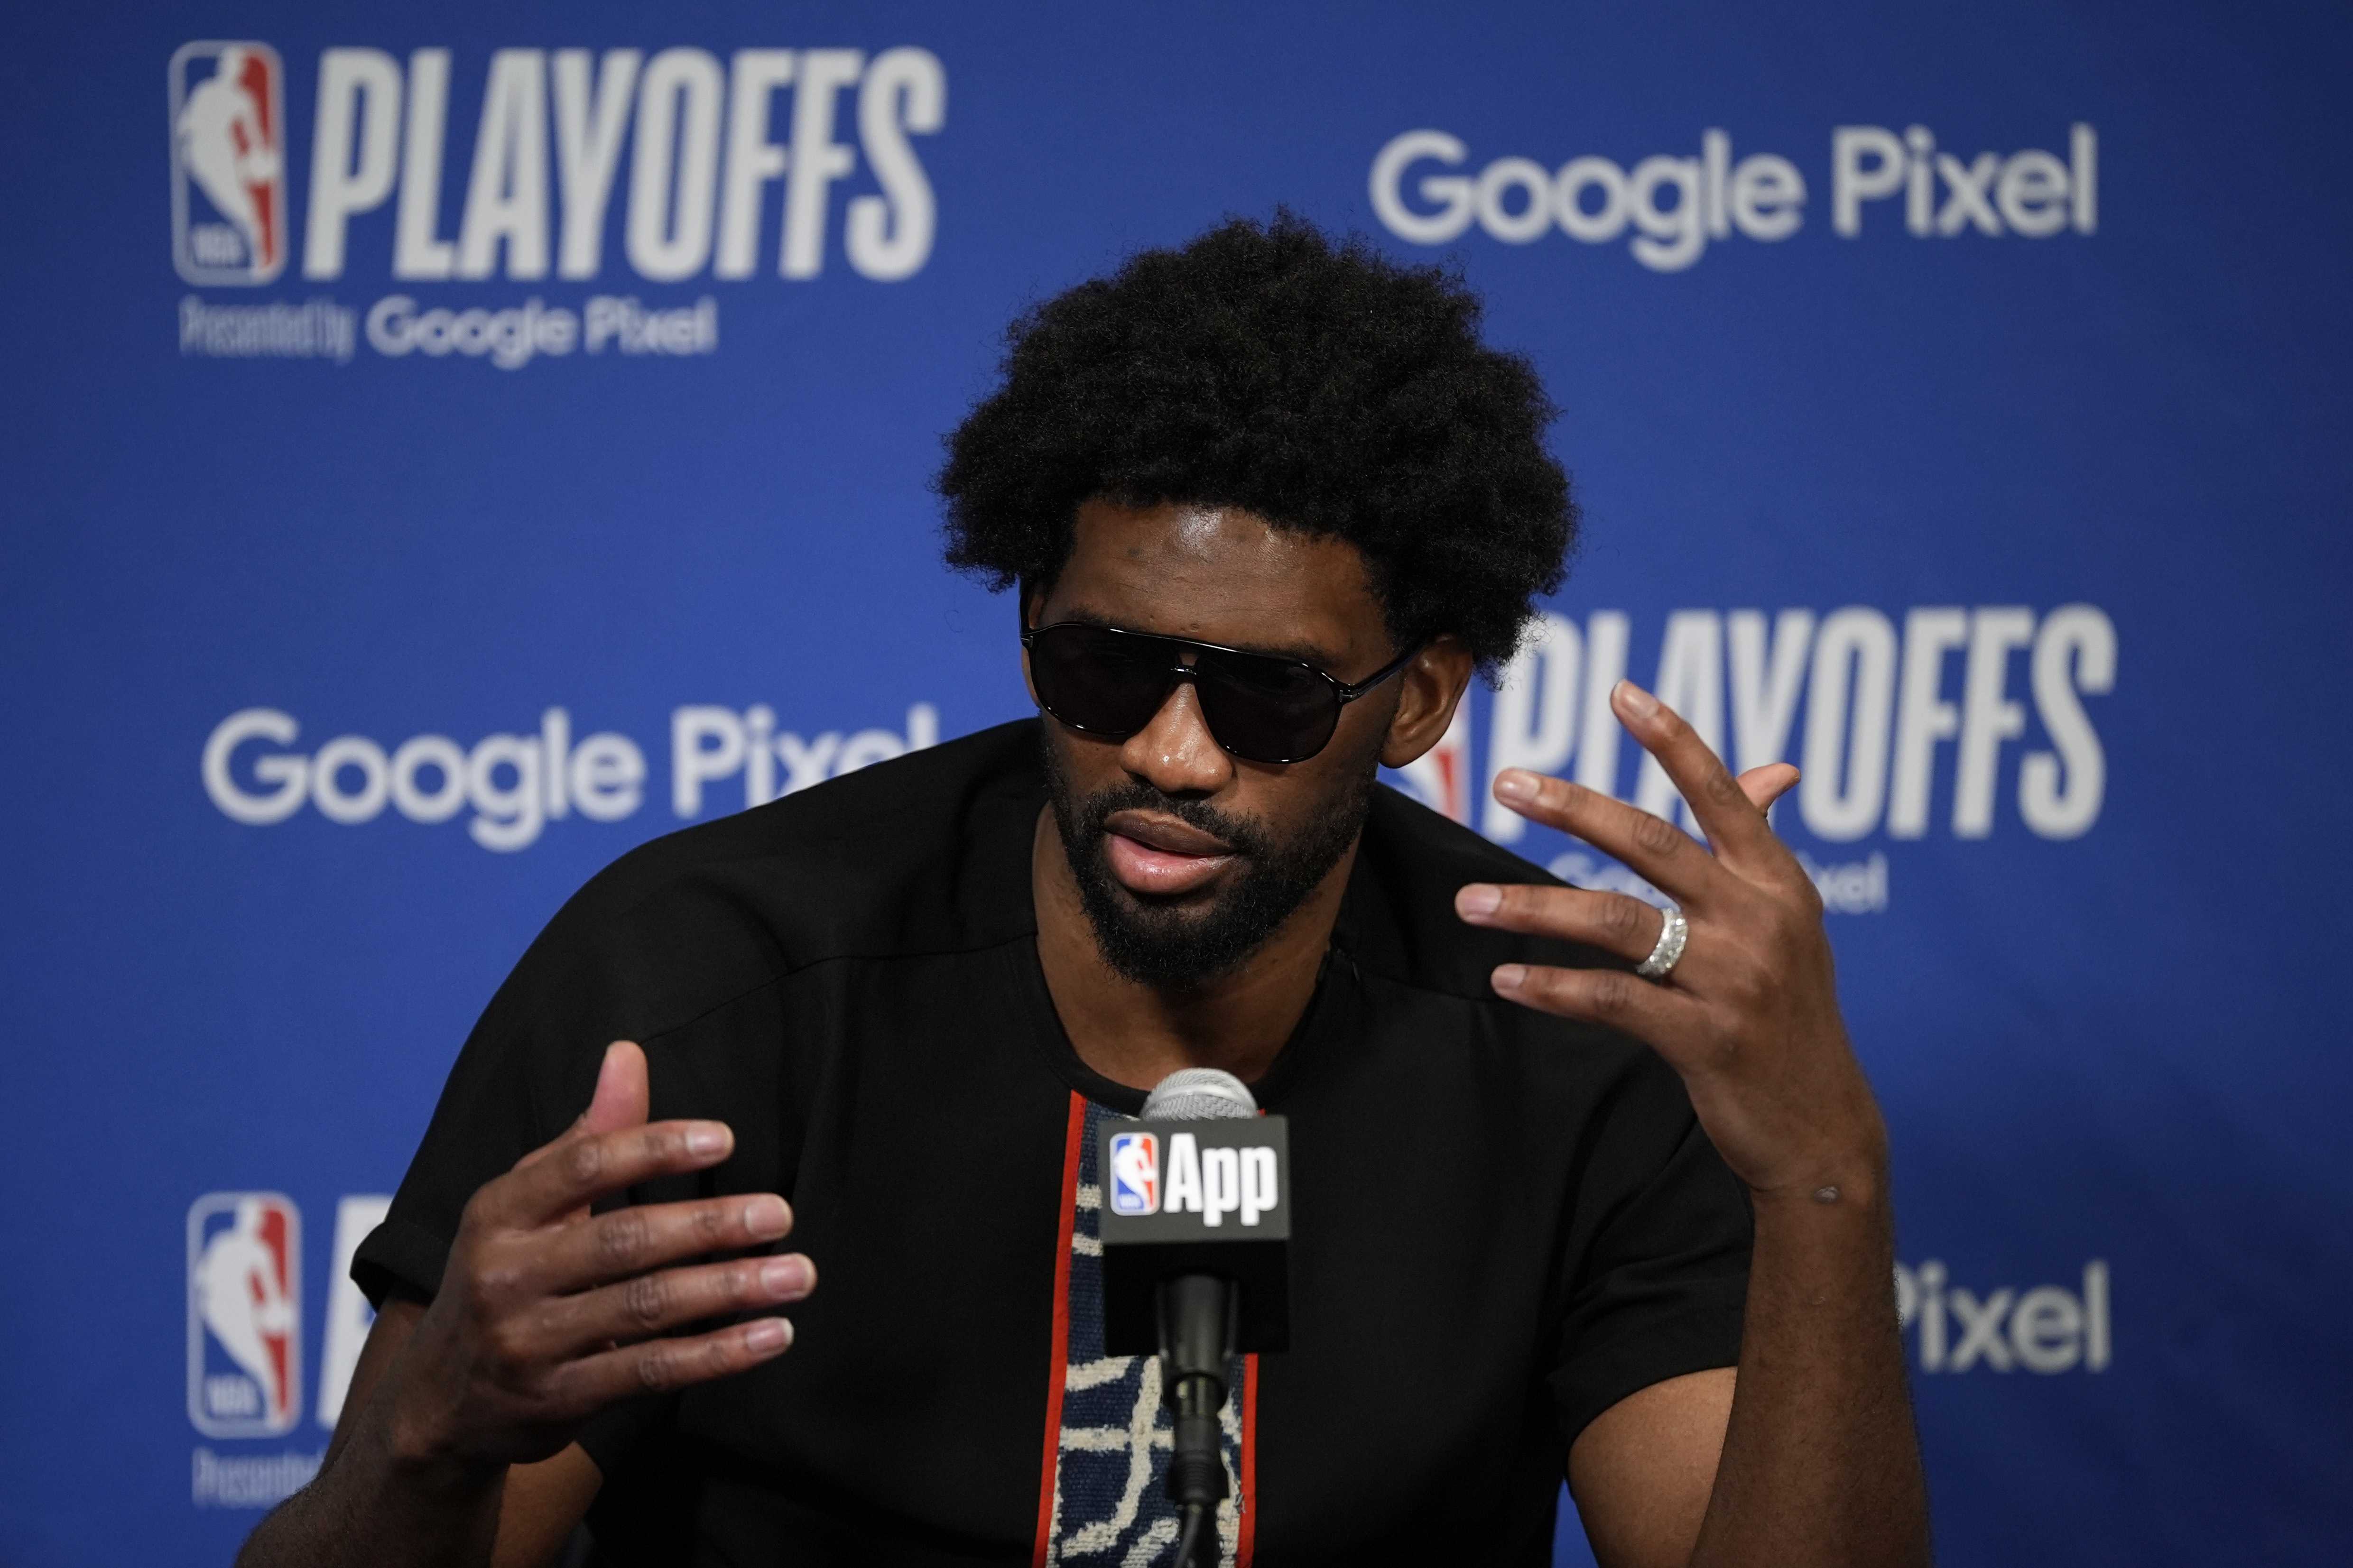 76ers All-Star center Joel Embiid says he has Bell's palsy